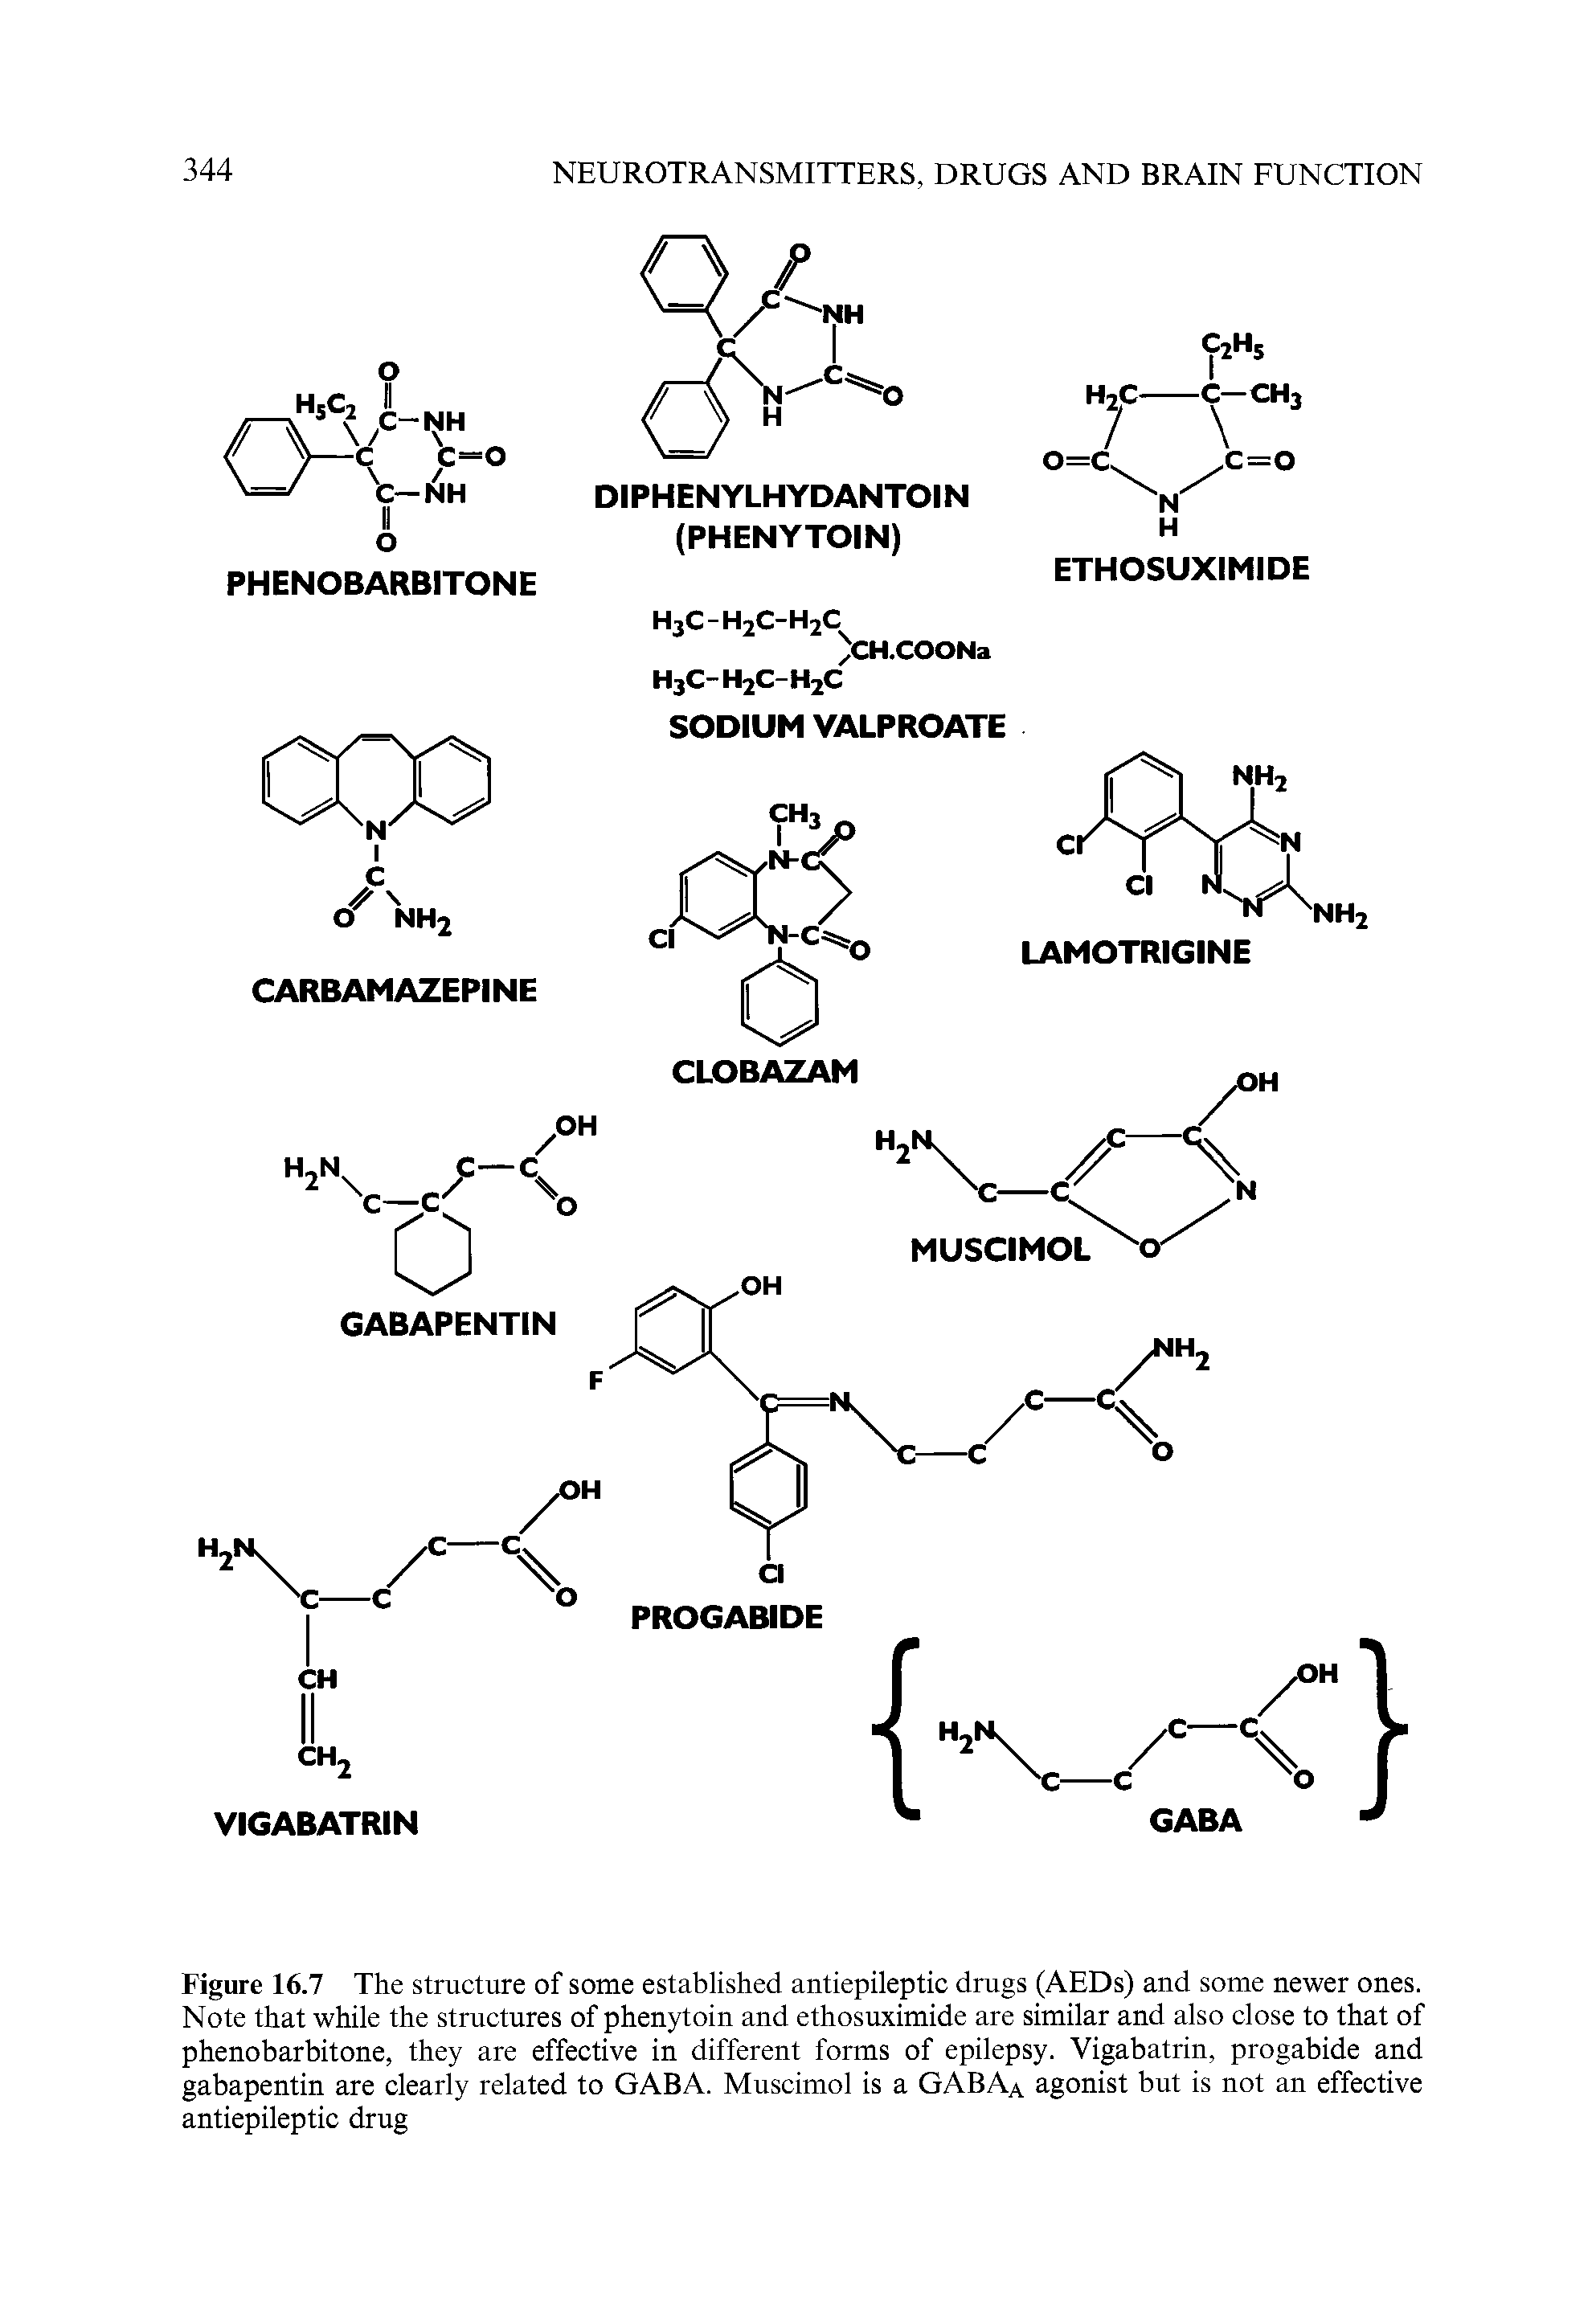 Figure 16.7 The structure of some established antiepileptic drugs (AEDs) and some newer ones. Note that while the structures of phenytoin and ethosuximide are similar and also close to that of phenobarbitone, they are effective in different forms of epilepsy. Vigabatrin, progabide and gabapentin are clearly related to GABA. Muscimol is a GABAa agonist but is not an effective antiepileptic drug...